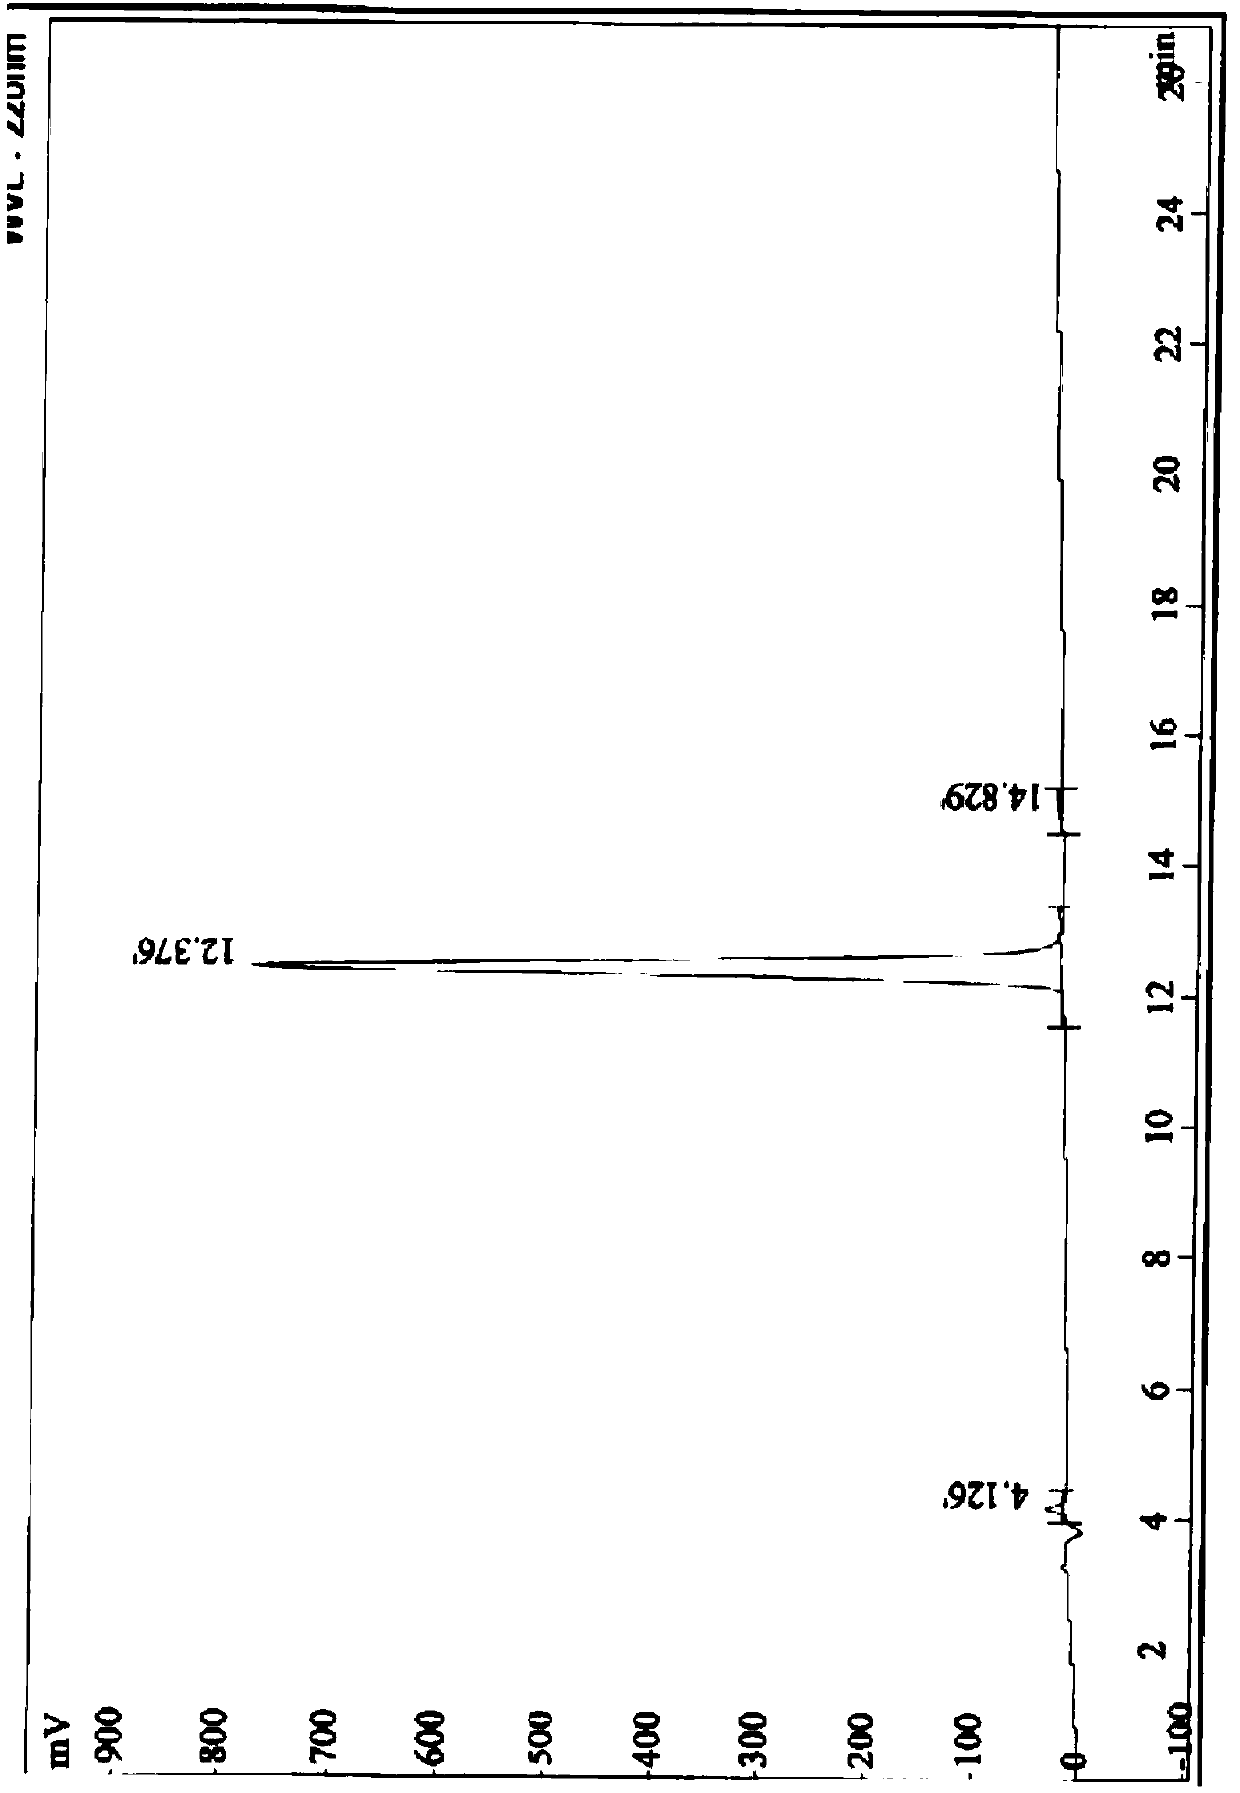 Short peptide, and applications of compositions thereof in treatment/prevention of diabetes and related diseases thereof